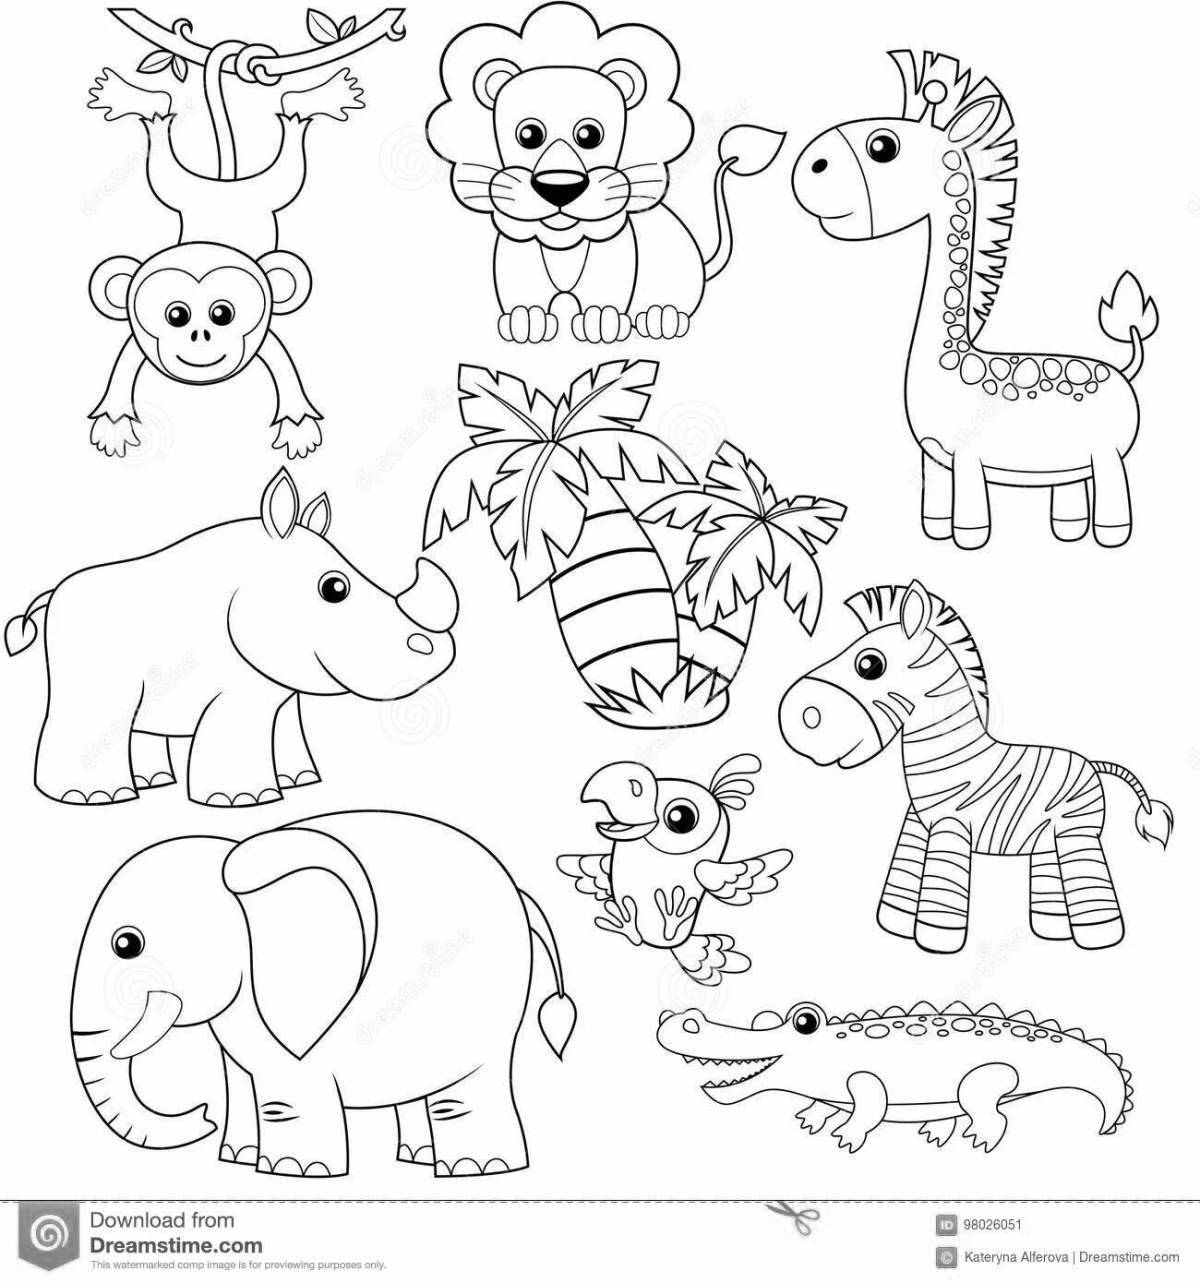 Unique african animals coloring page for 5-7 year olds